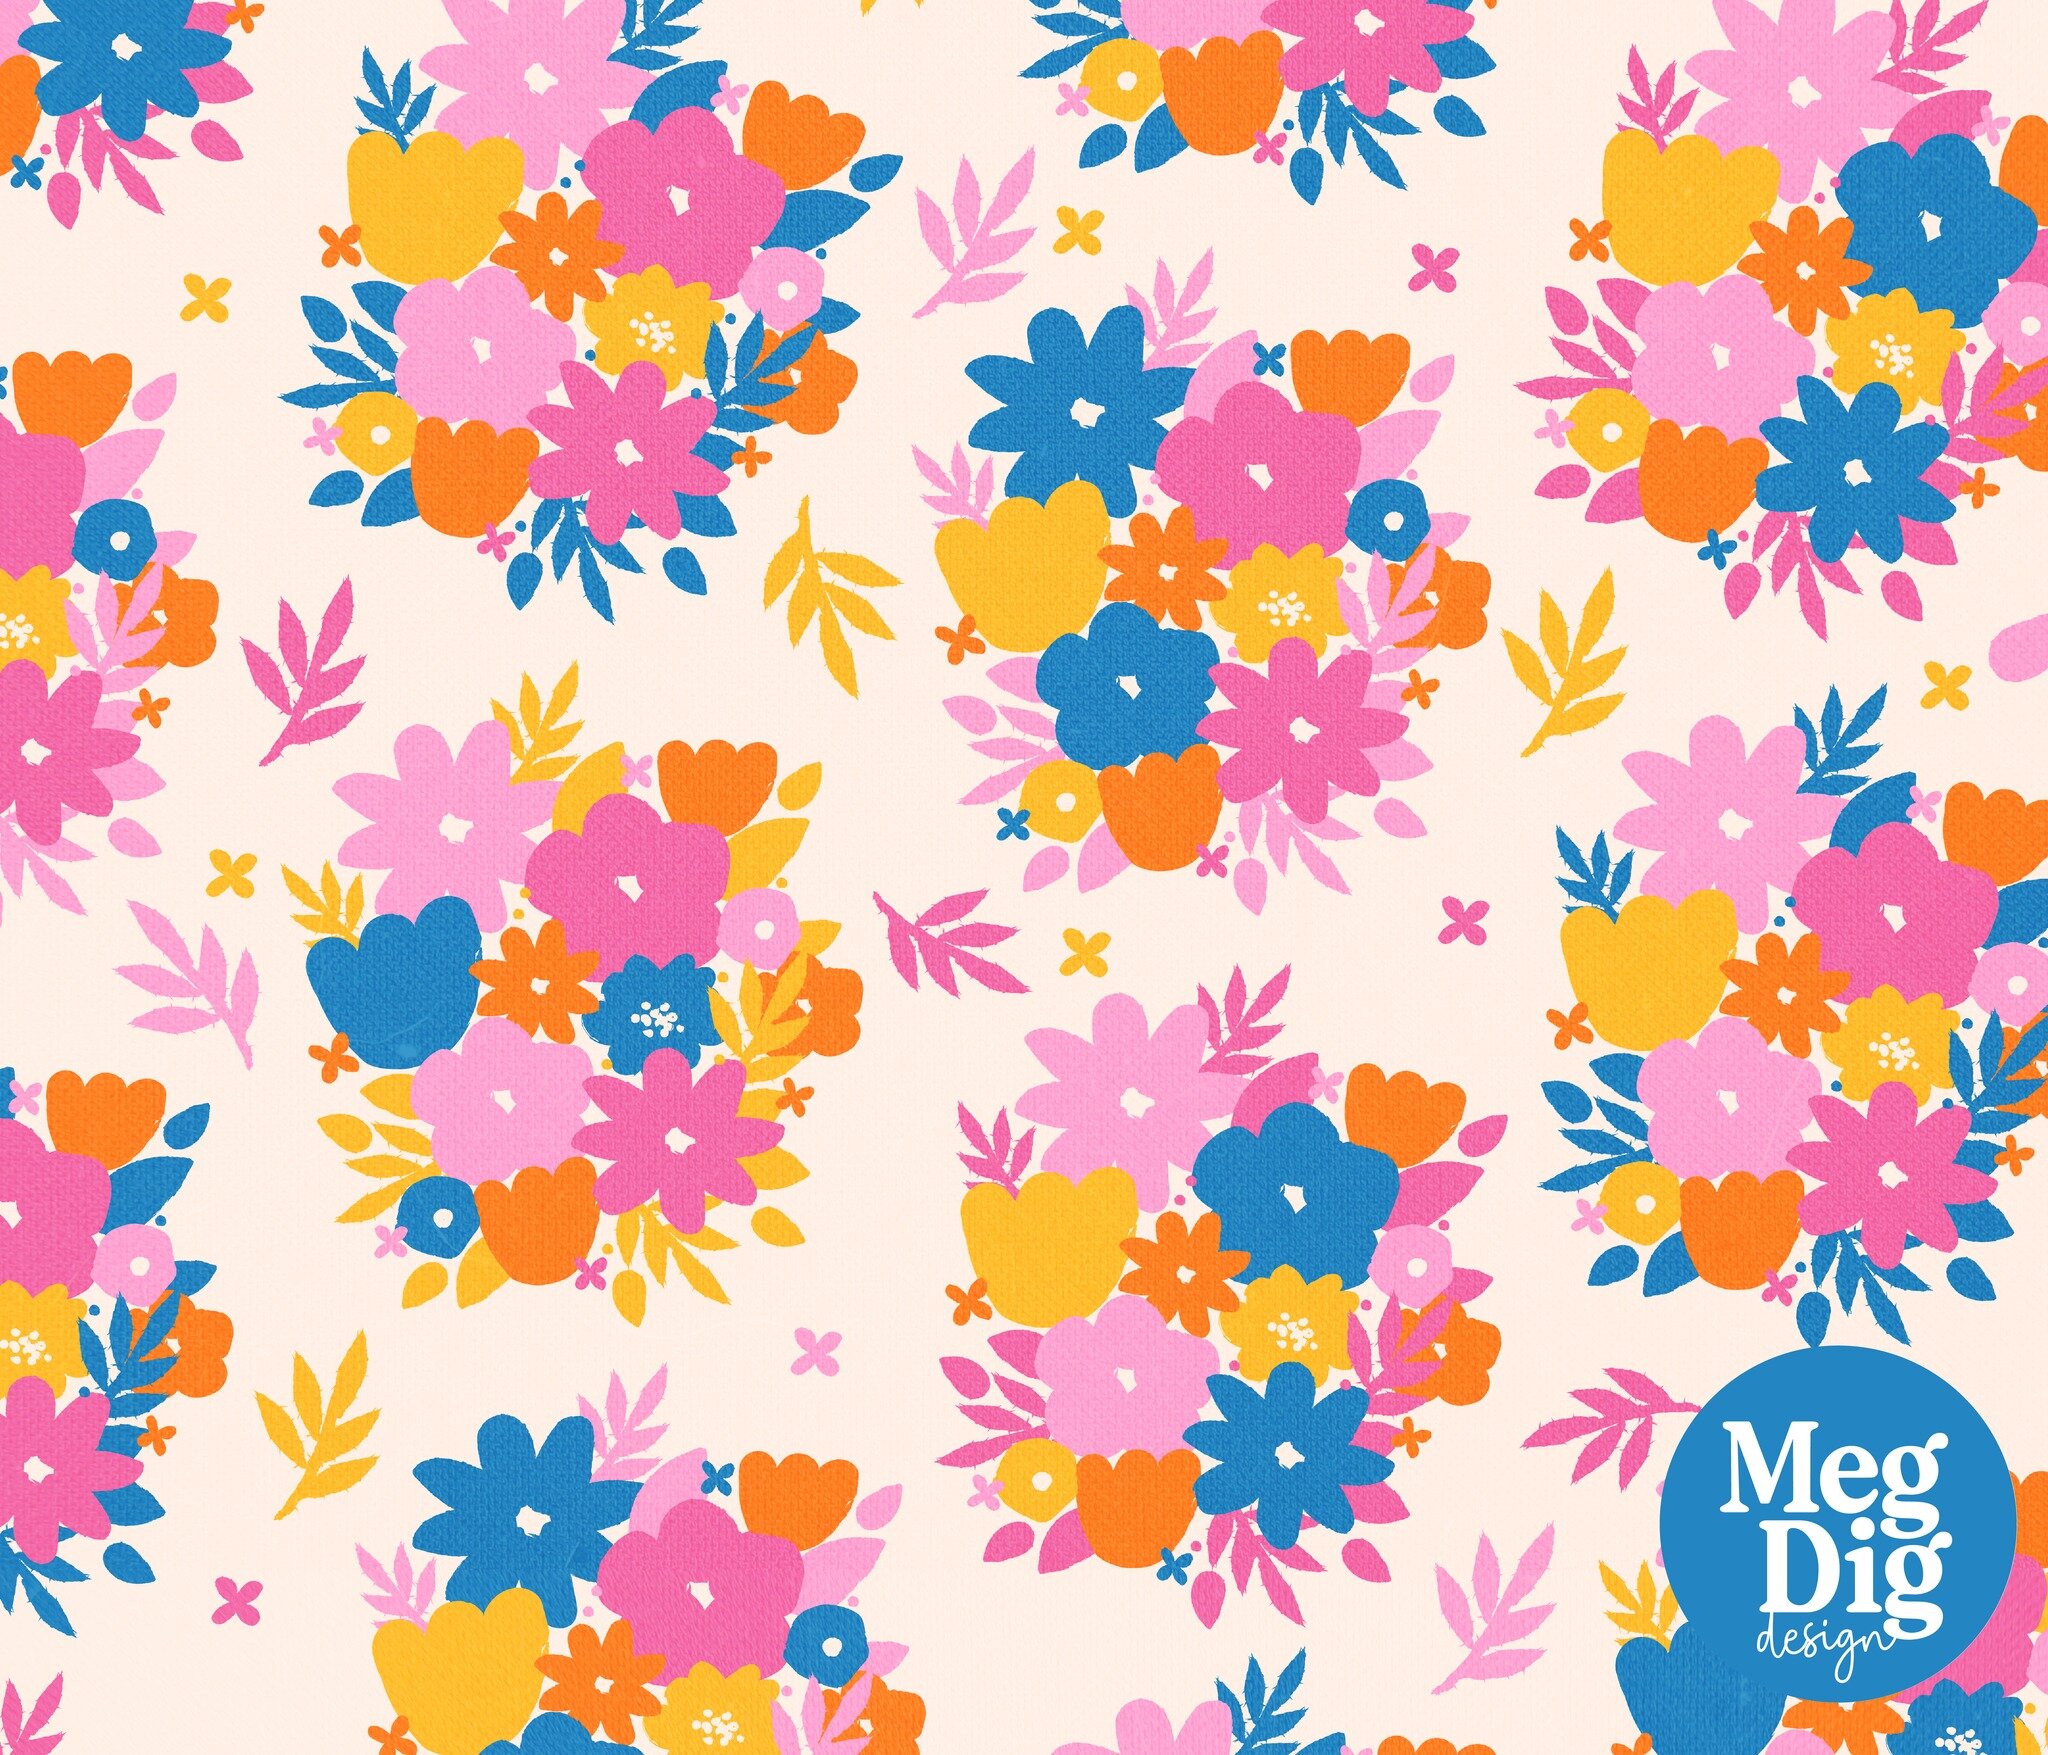 Florals? For spring? Groundbreaking. 🌷💐🌷
I used some elements from an art print I made ages ago to create this bright spring pattern. Check it out on @spoonflower !
.
.
.
.
#surfacedesign #surfacepattern #surfacepatterndesign #spoonflowerfabric
#s